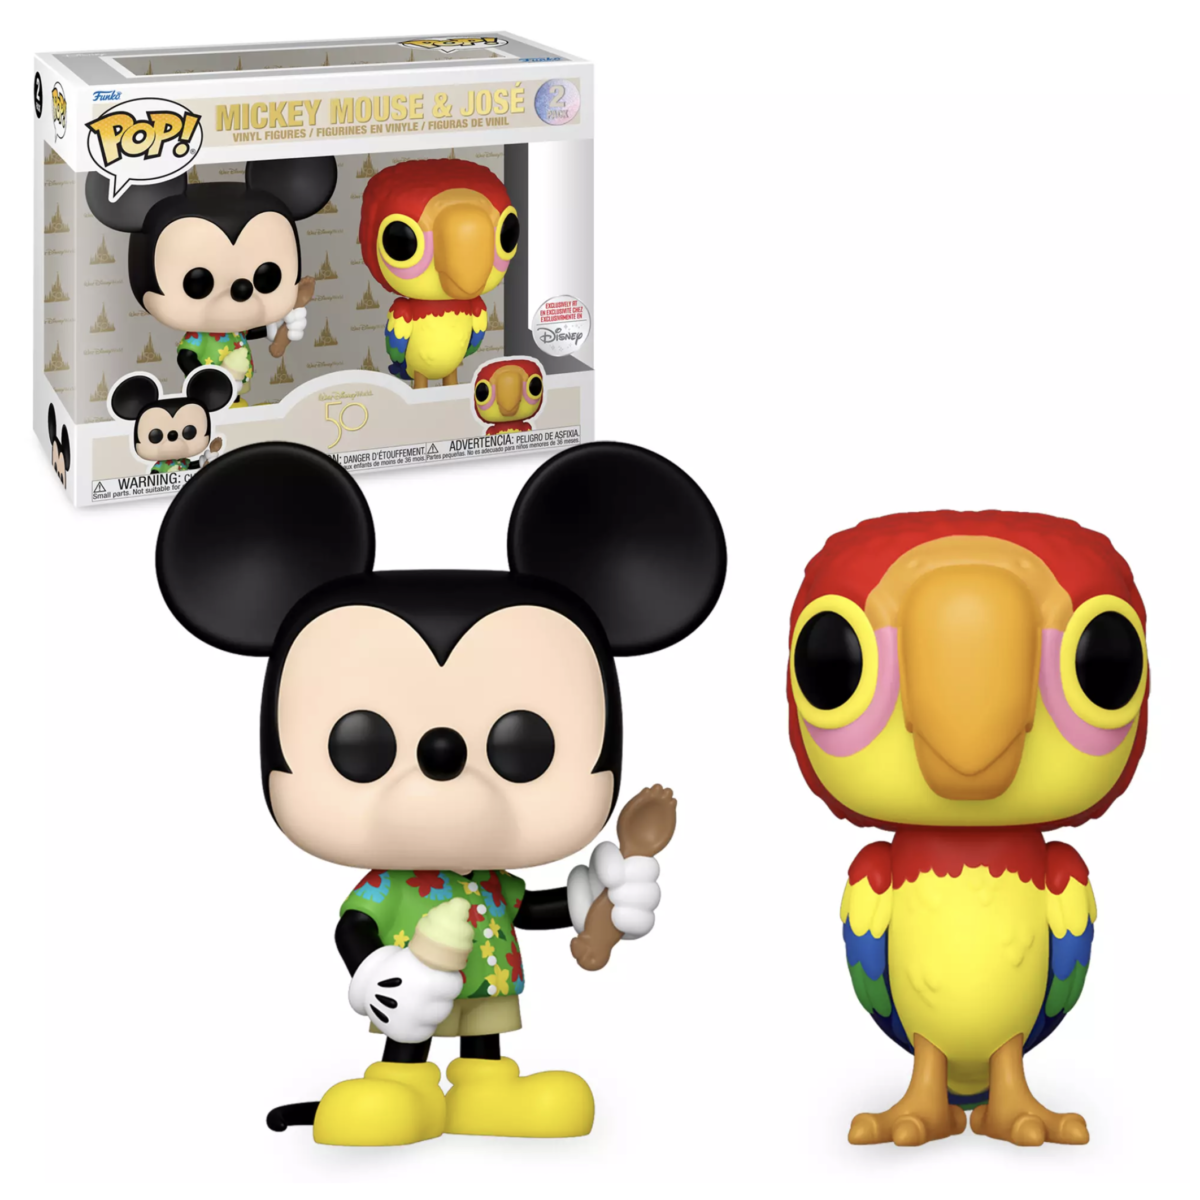 Mickey Mouse & Jose - Limited Edition Disney Exclusive – Black